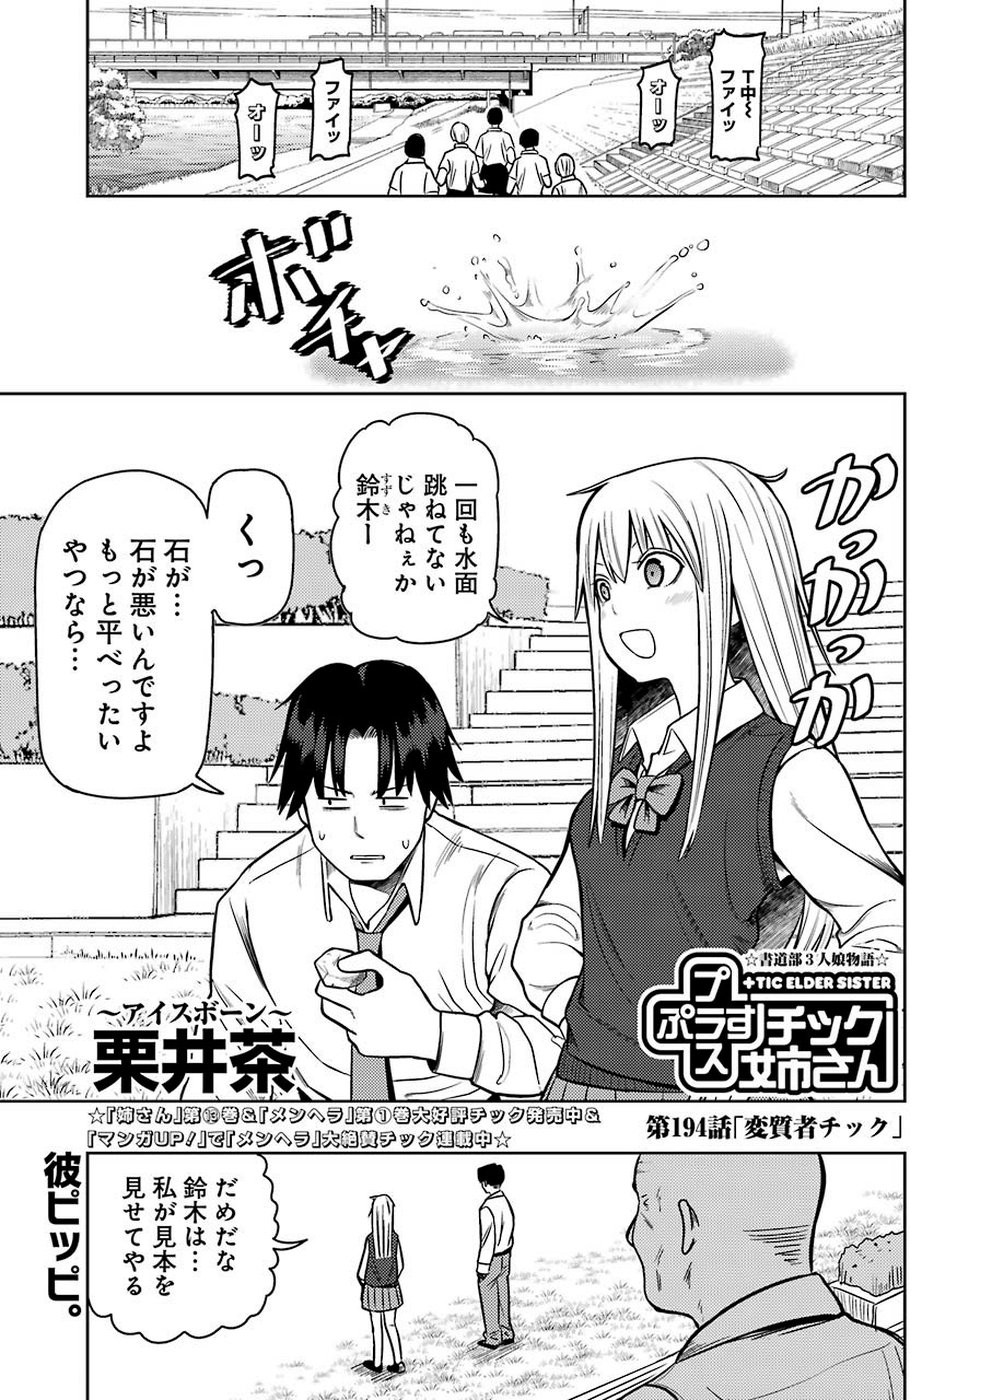 + Tic Nee-san - Chapter 194 - Page 1